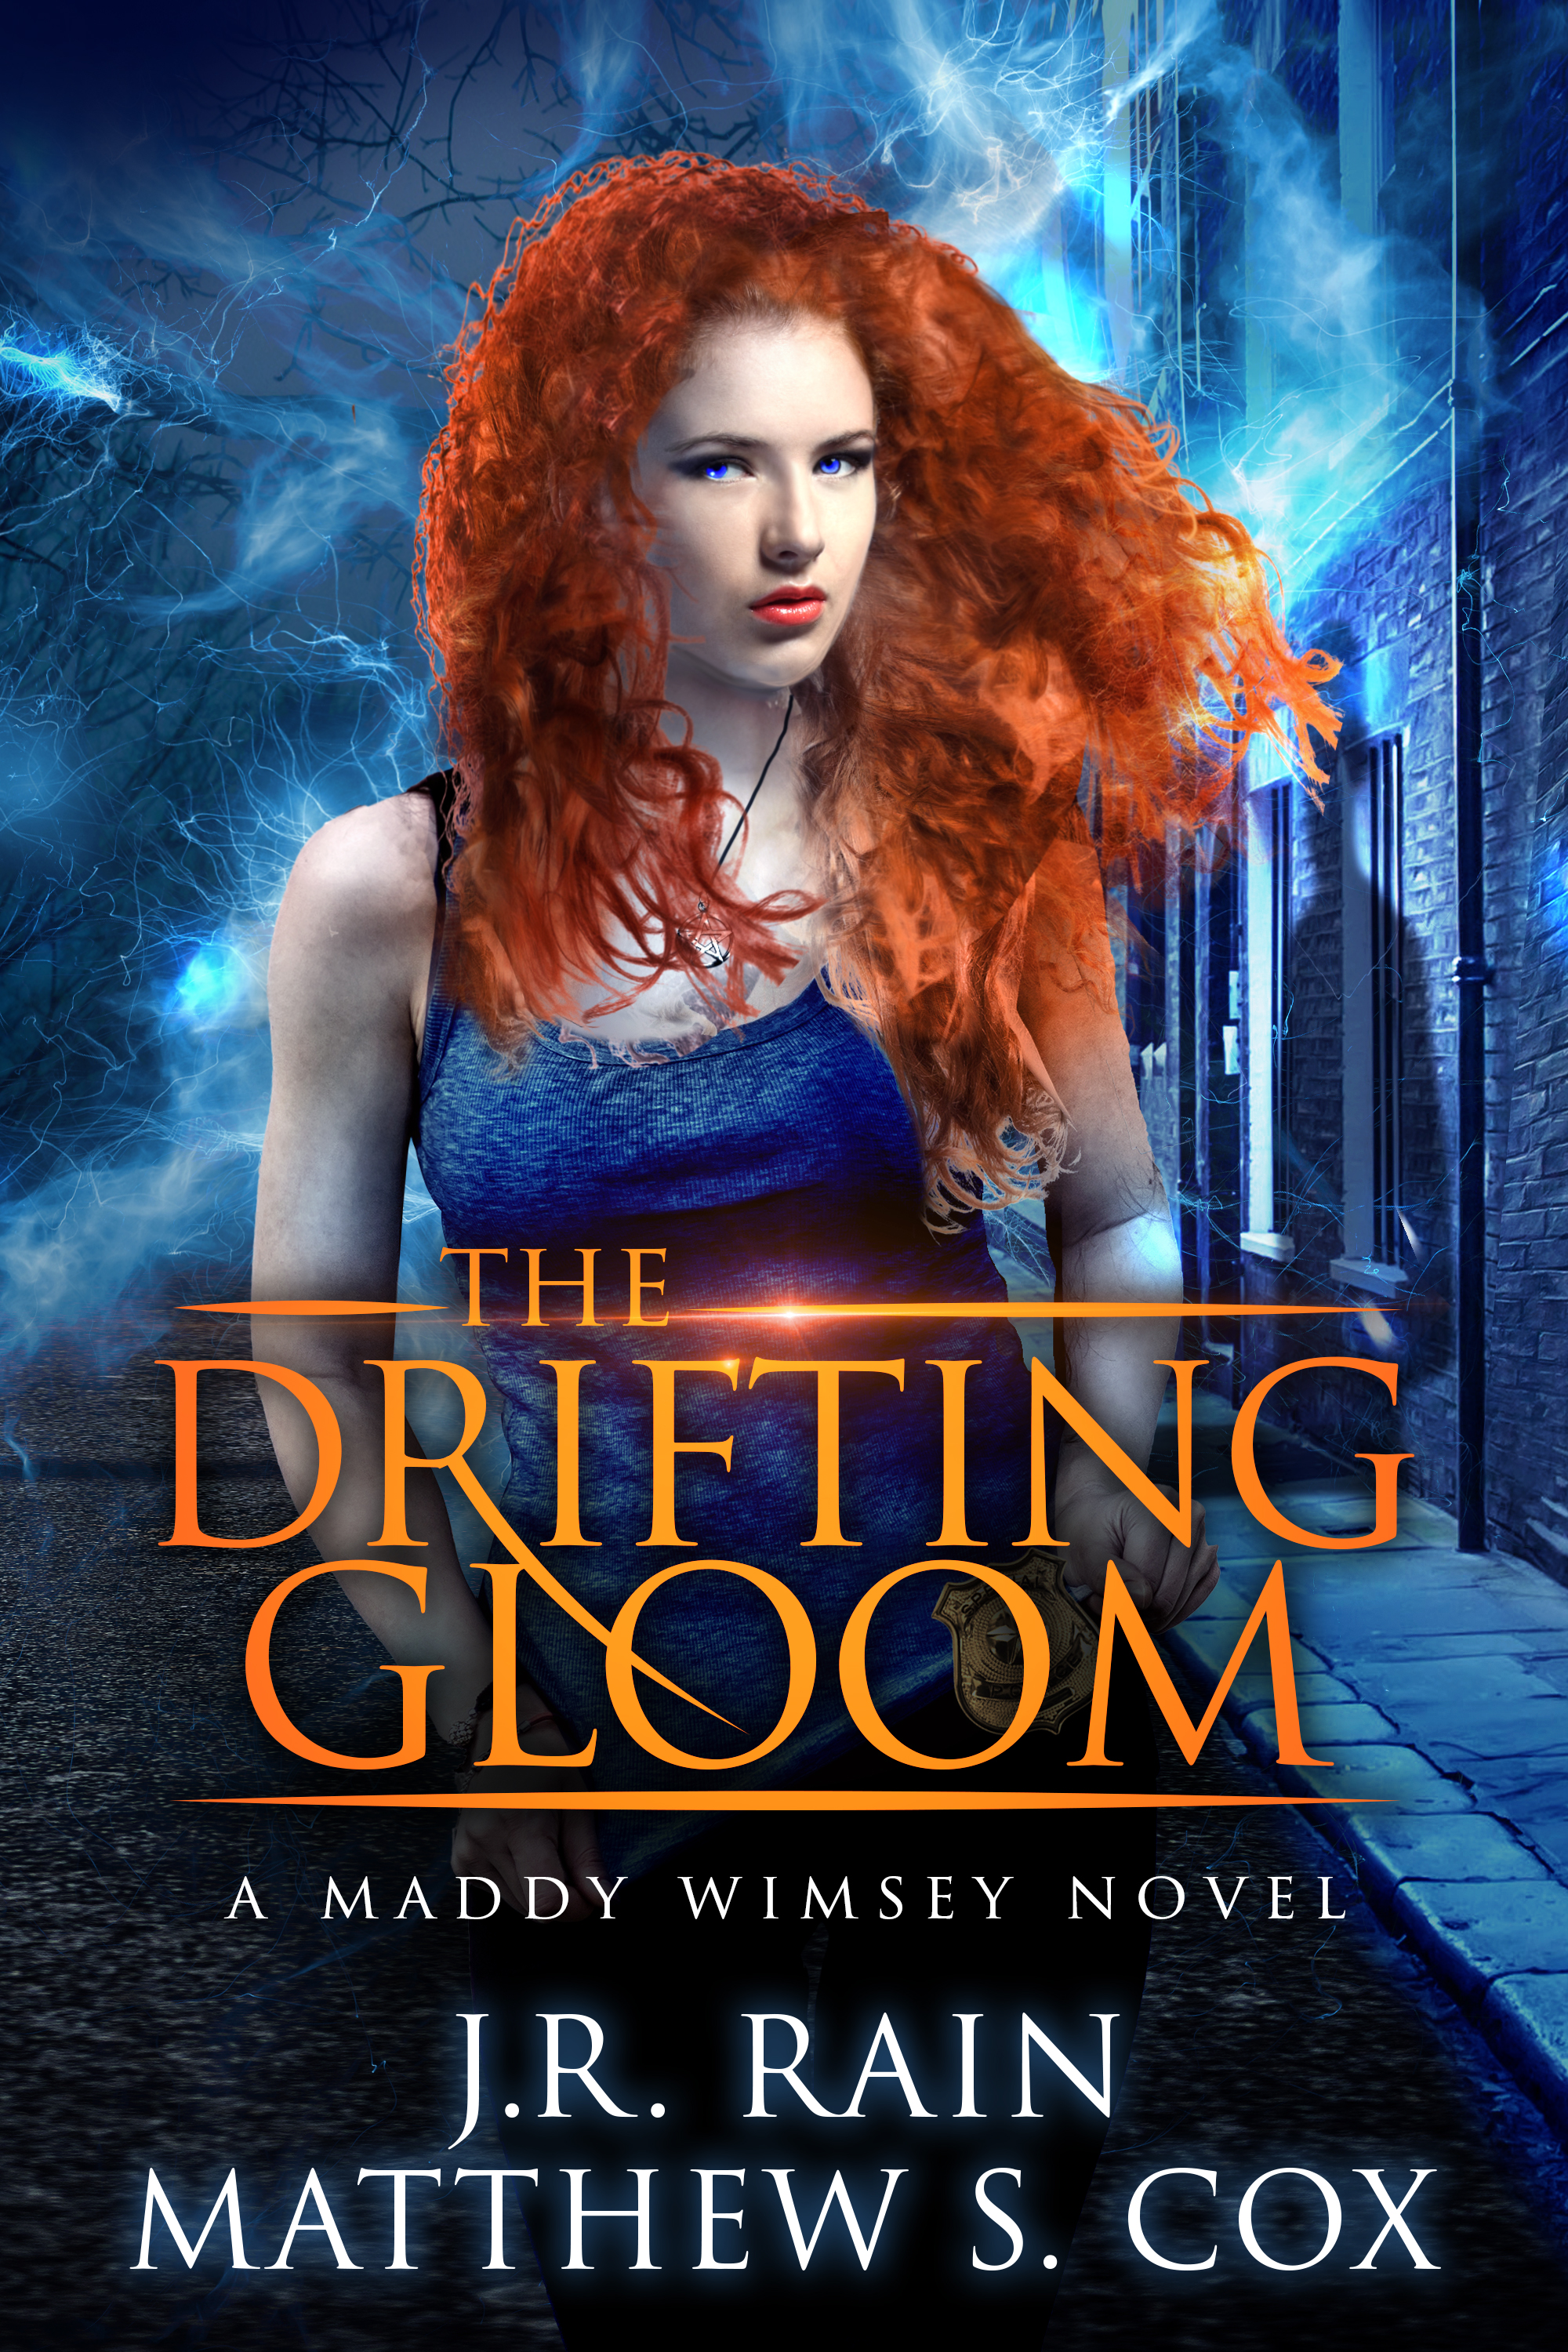 Maddy Wimsey Book 2